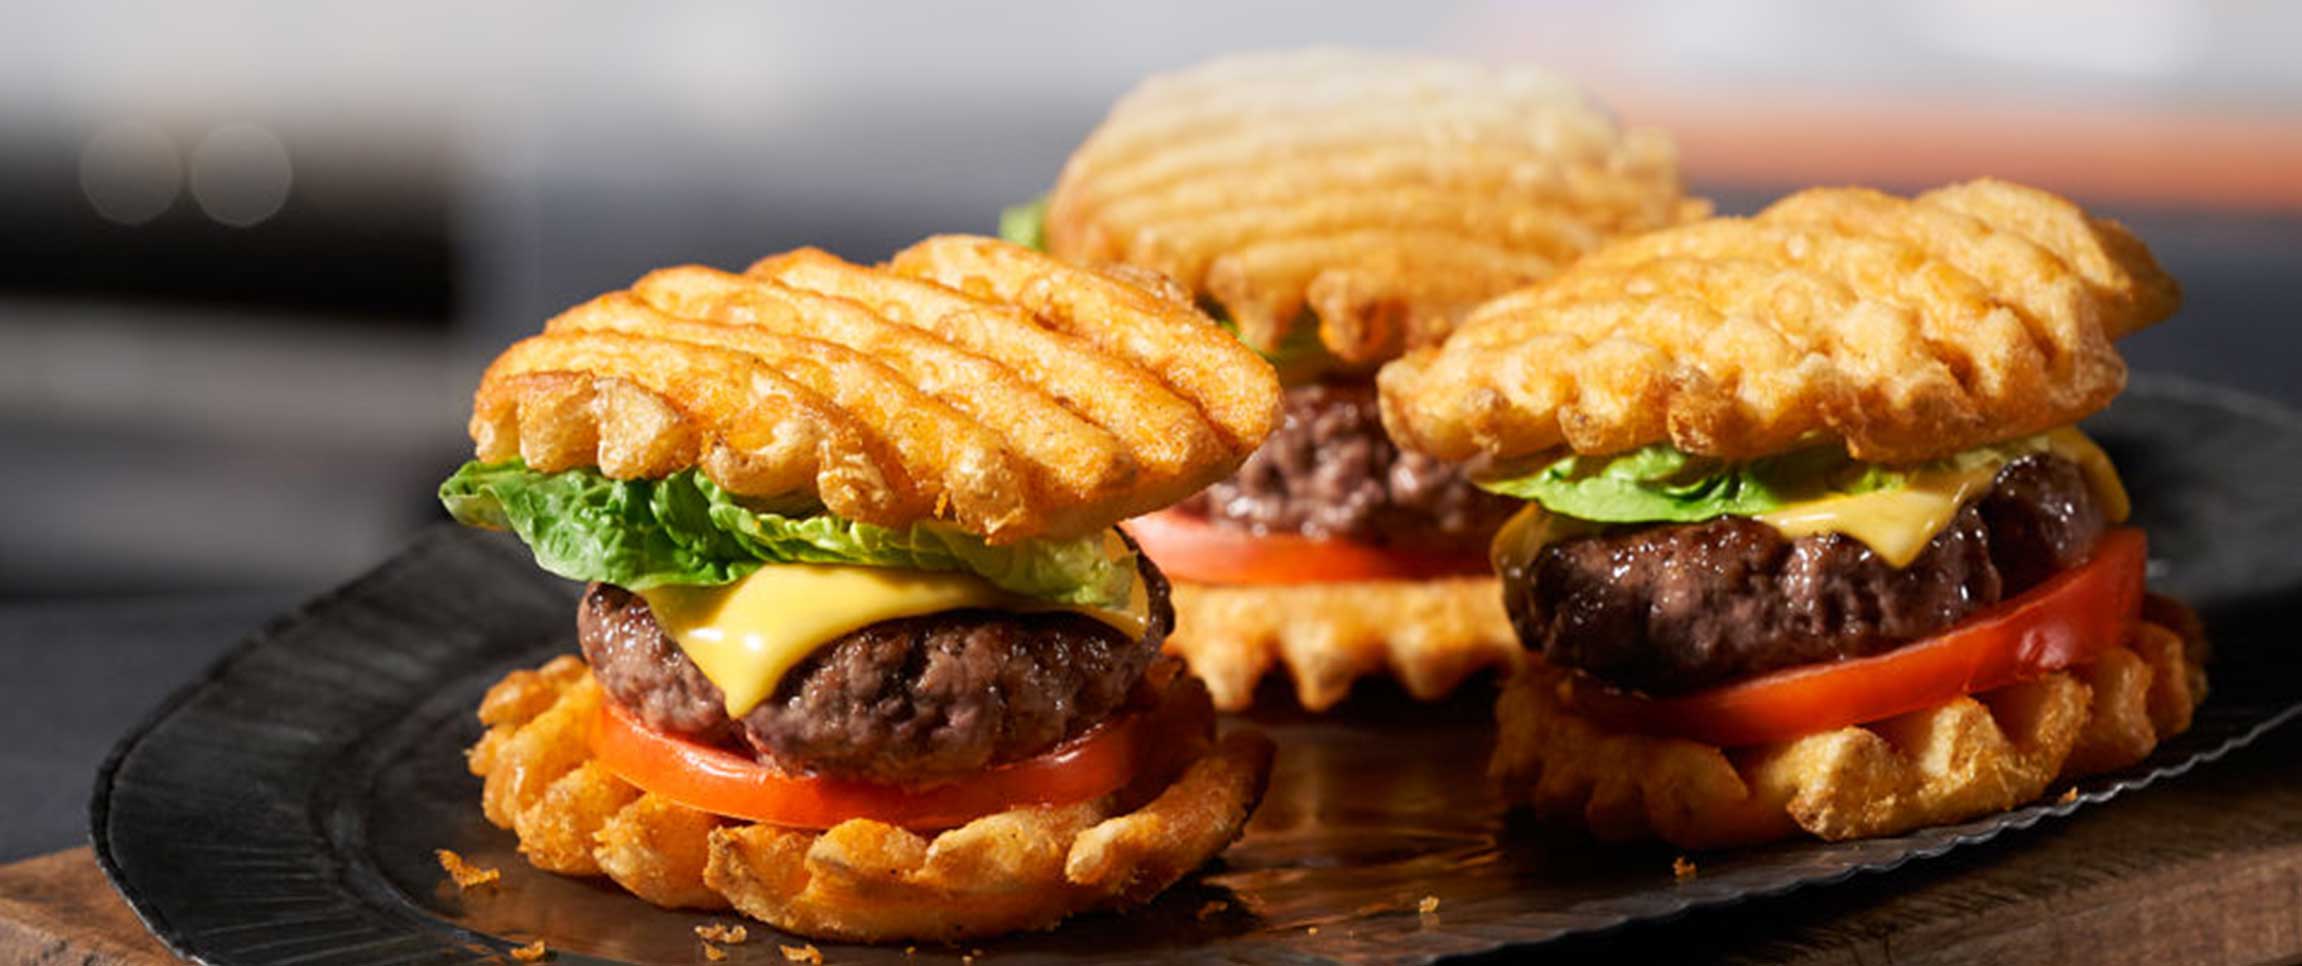 French Fry Burger Sliders